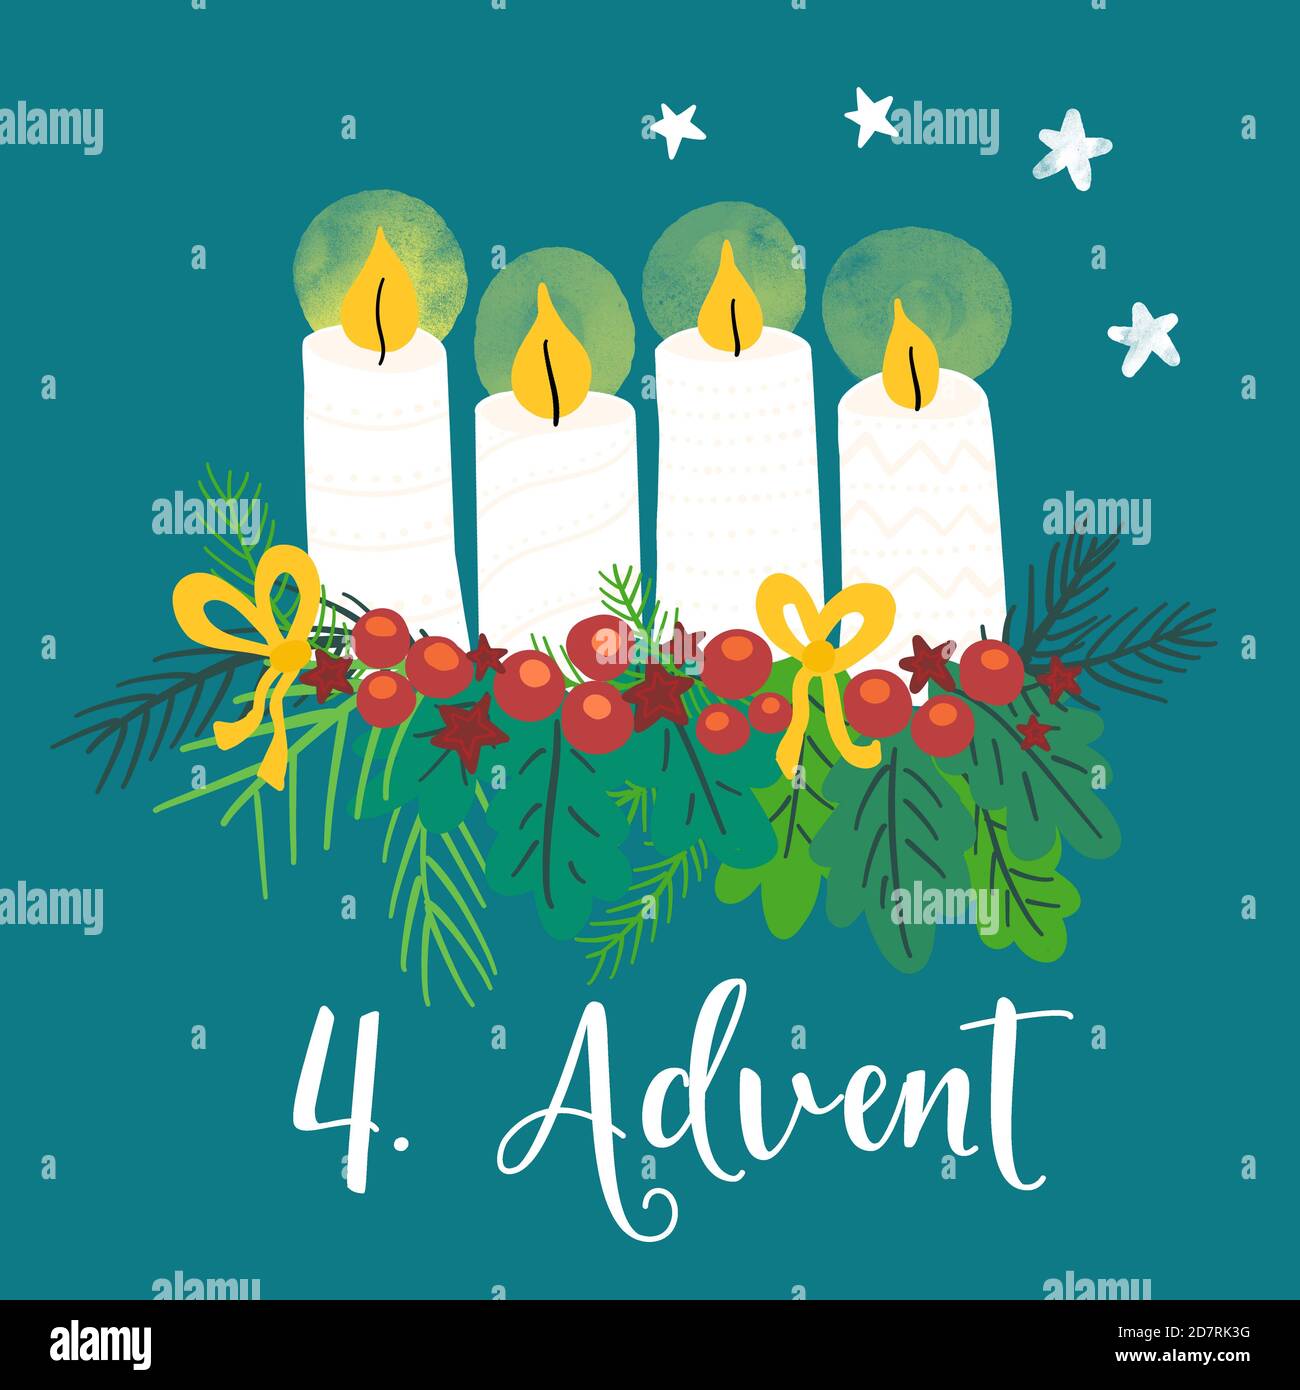 Advent wreath illustration. Christmas arrangements with 4 candles, four burning, bows, berries and pine branches. 4th Advent. German holiday tradition Stock Photo